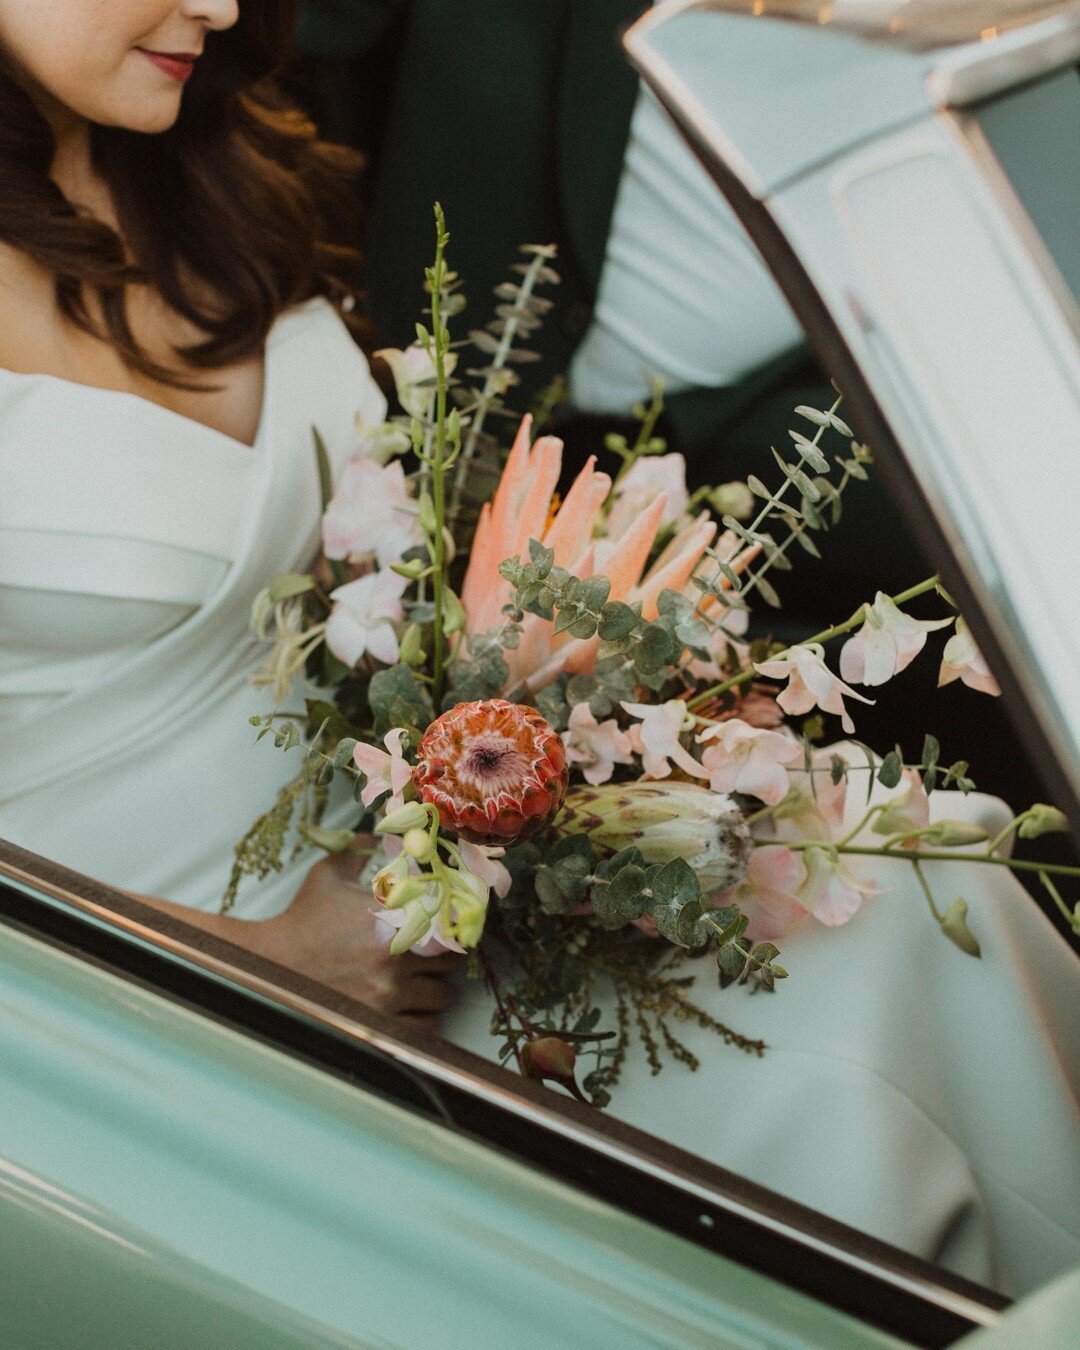 Our sweet bride Ashley with her perfect hair, lips, bouquet and convertible mustang. Love watching you and Ryan enjoy life with that new cute baby Marley!